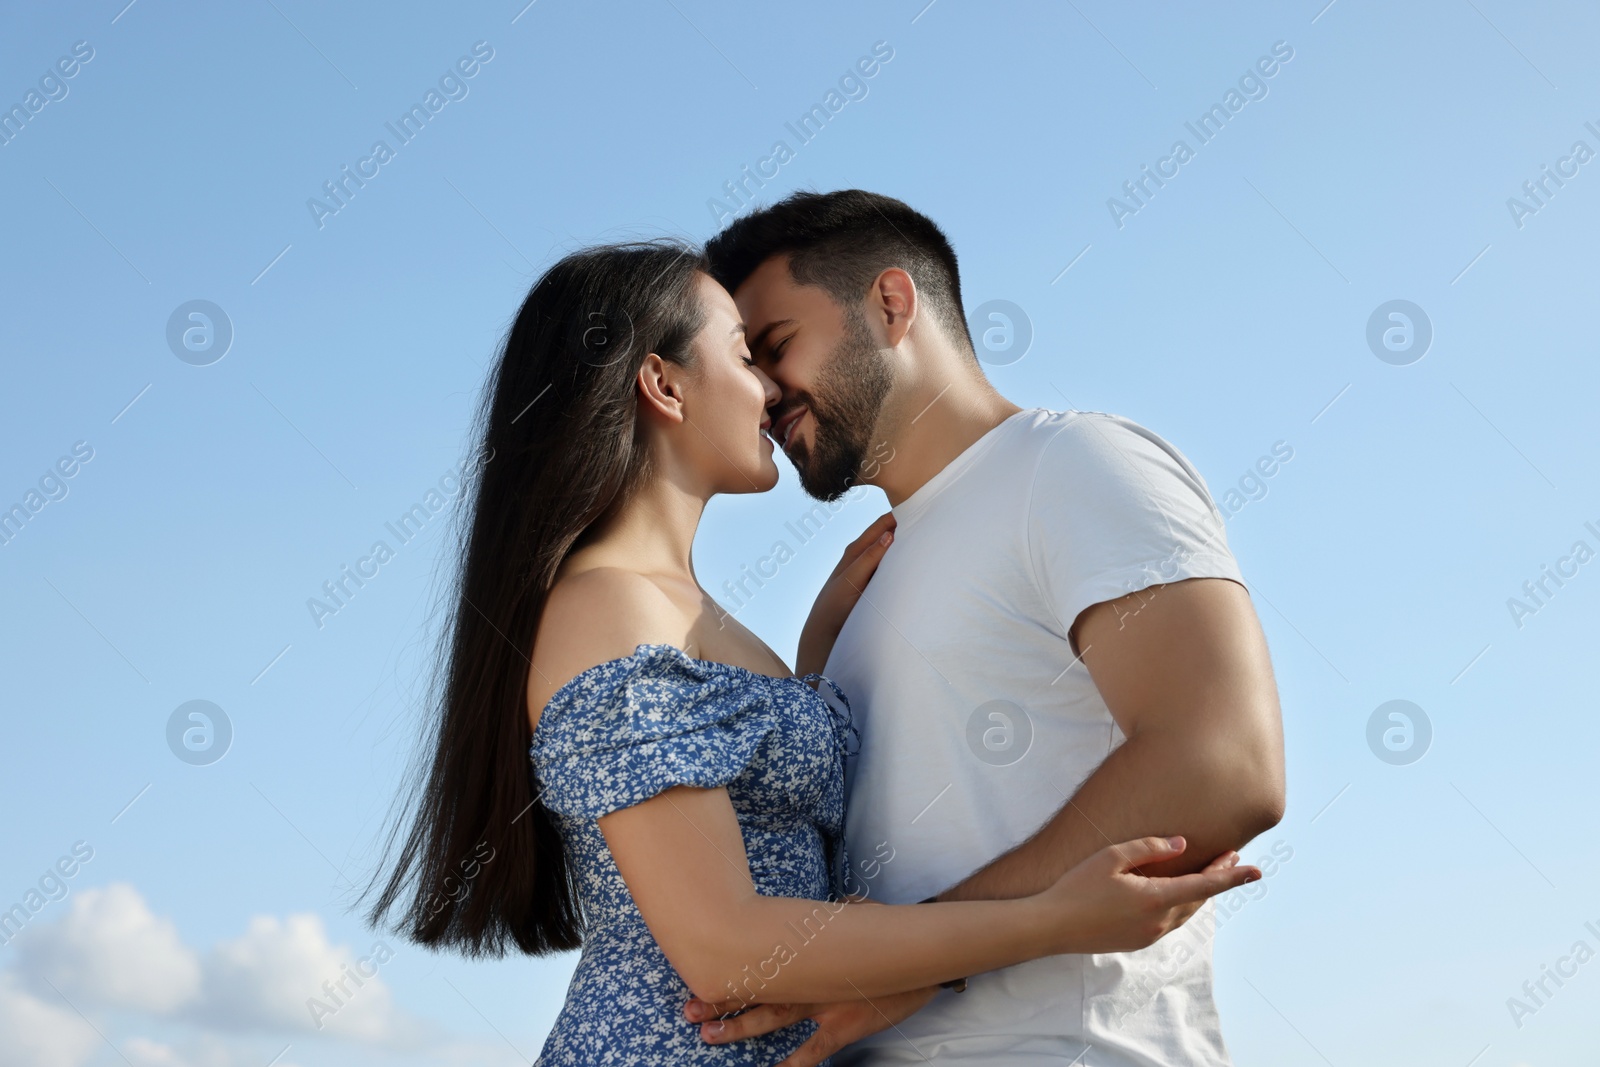 Photo of Romantic date. Beautiful couple spending time together against blue sky